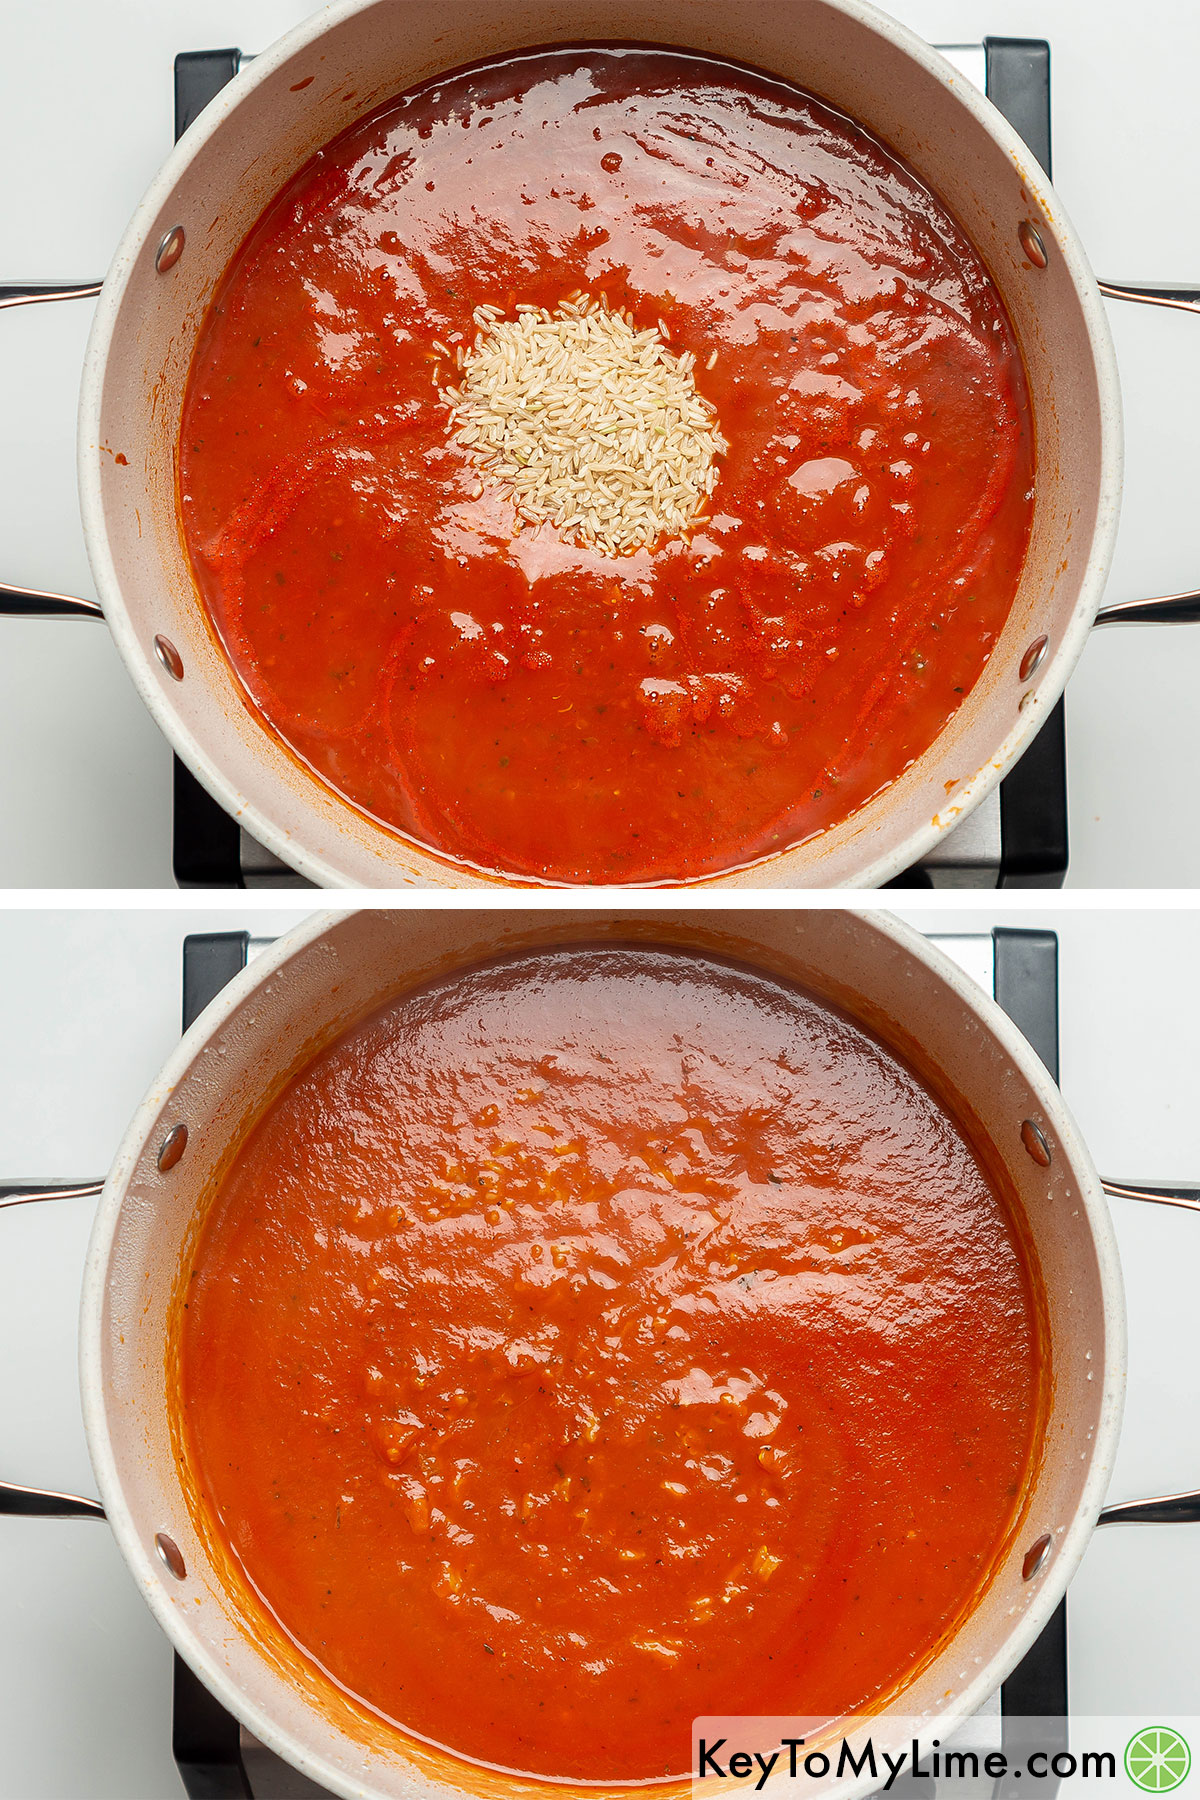 Stirring brown rice into tomato soup, then cooking the rice in the soup.